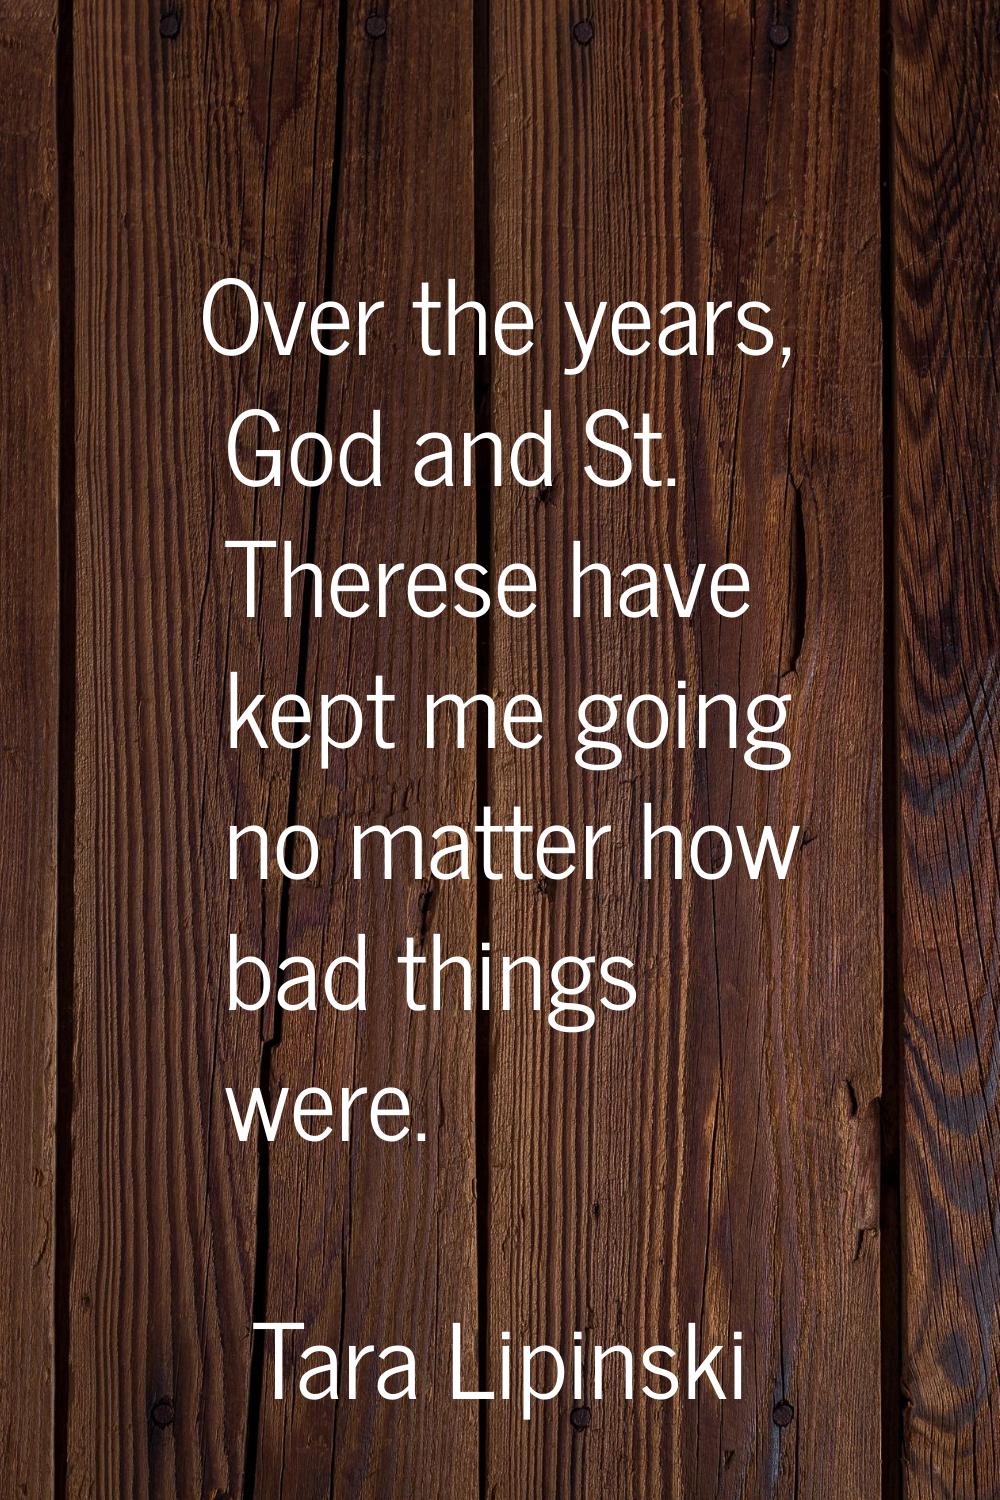 Over the years, God and St. Therese have kept me going no matter how bad things were.